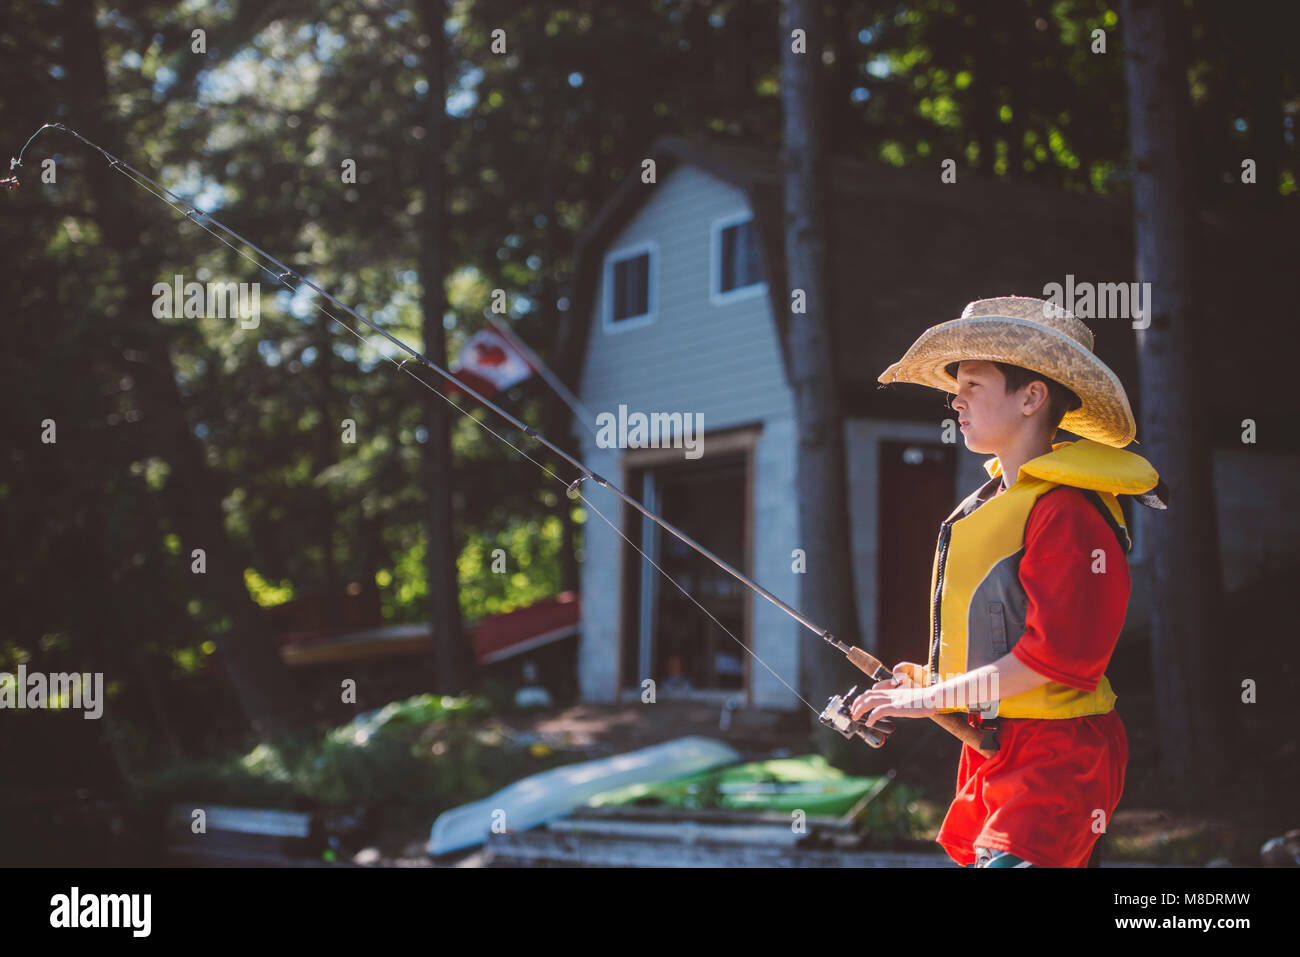 Boy in cowboy hat fishing from lakeside Stock Photo